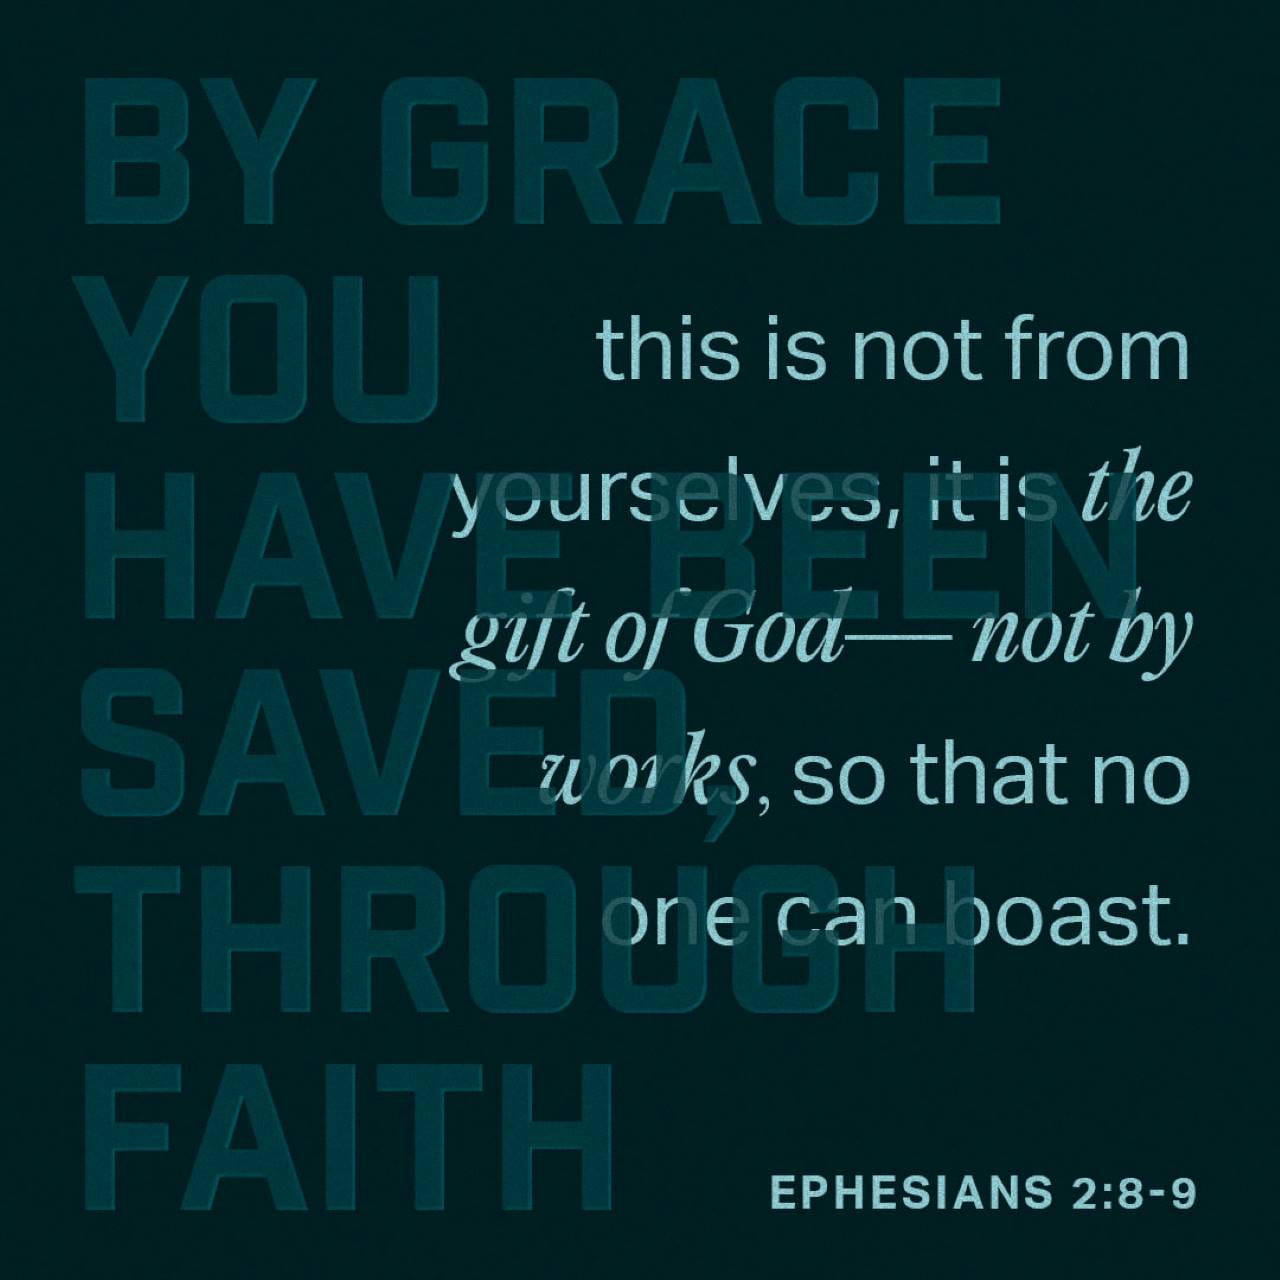 Ephesians 2:8-10 For it is by grace you have been saved